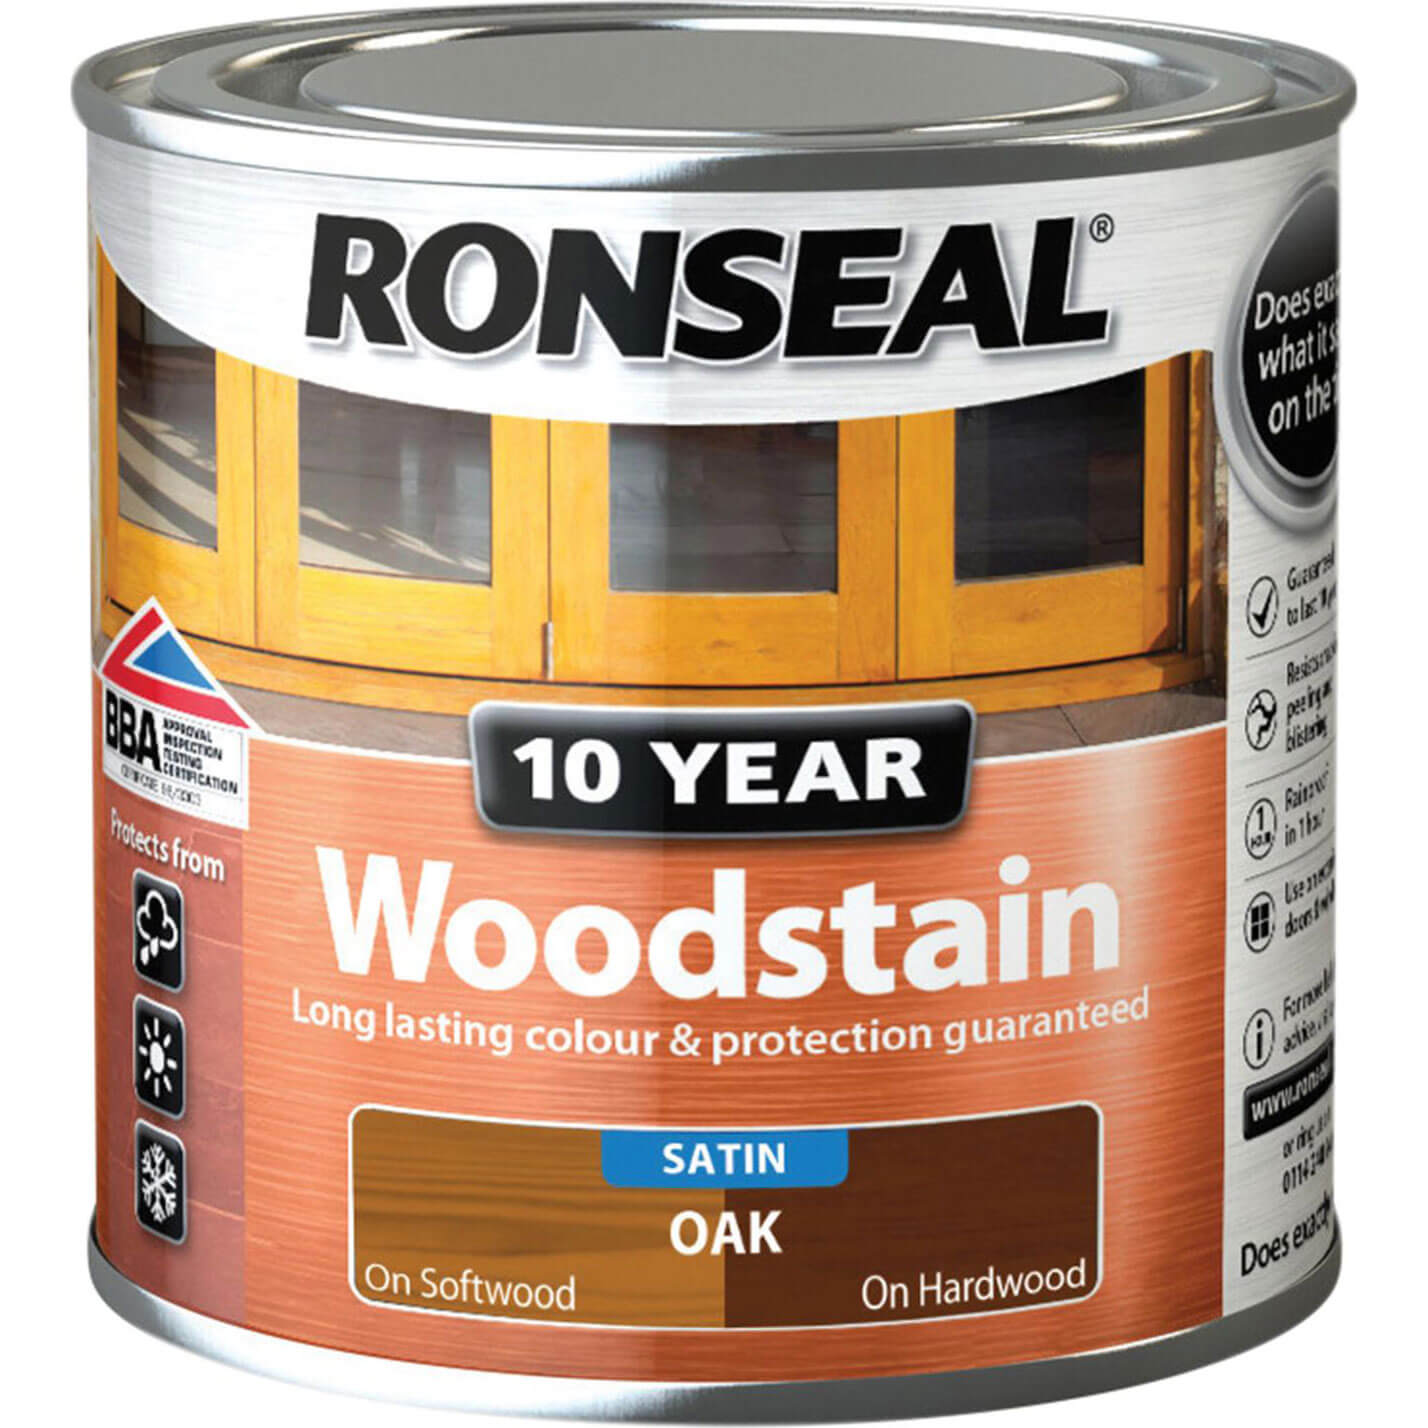 Image of Ronseal 10 Year Wood Stain Oak 250ml